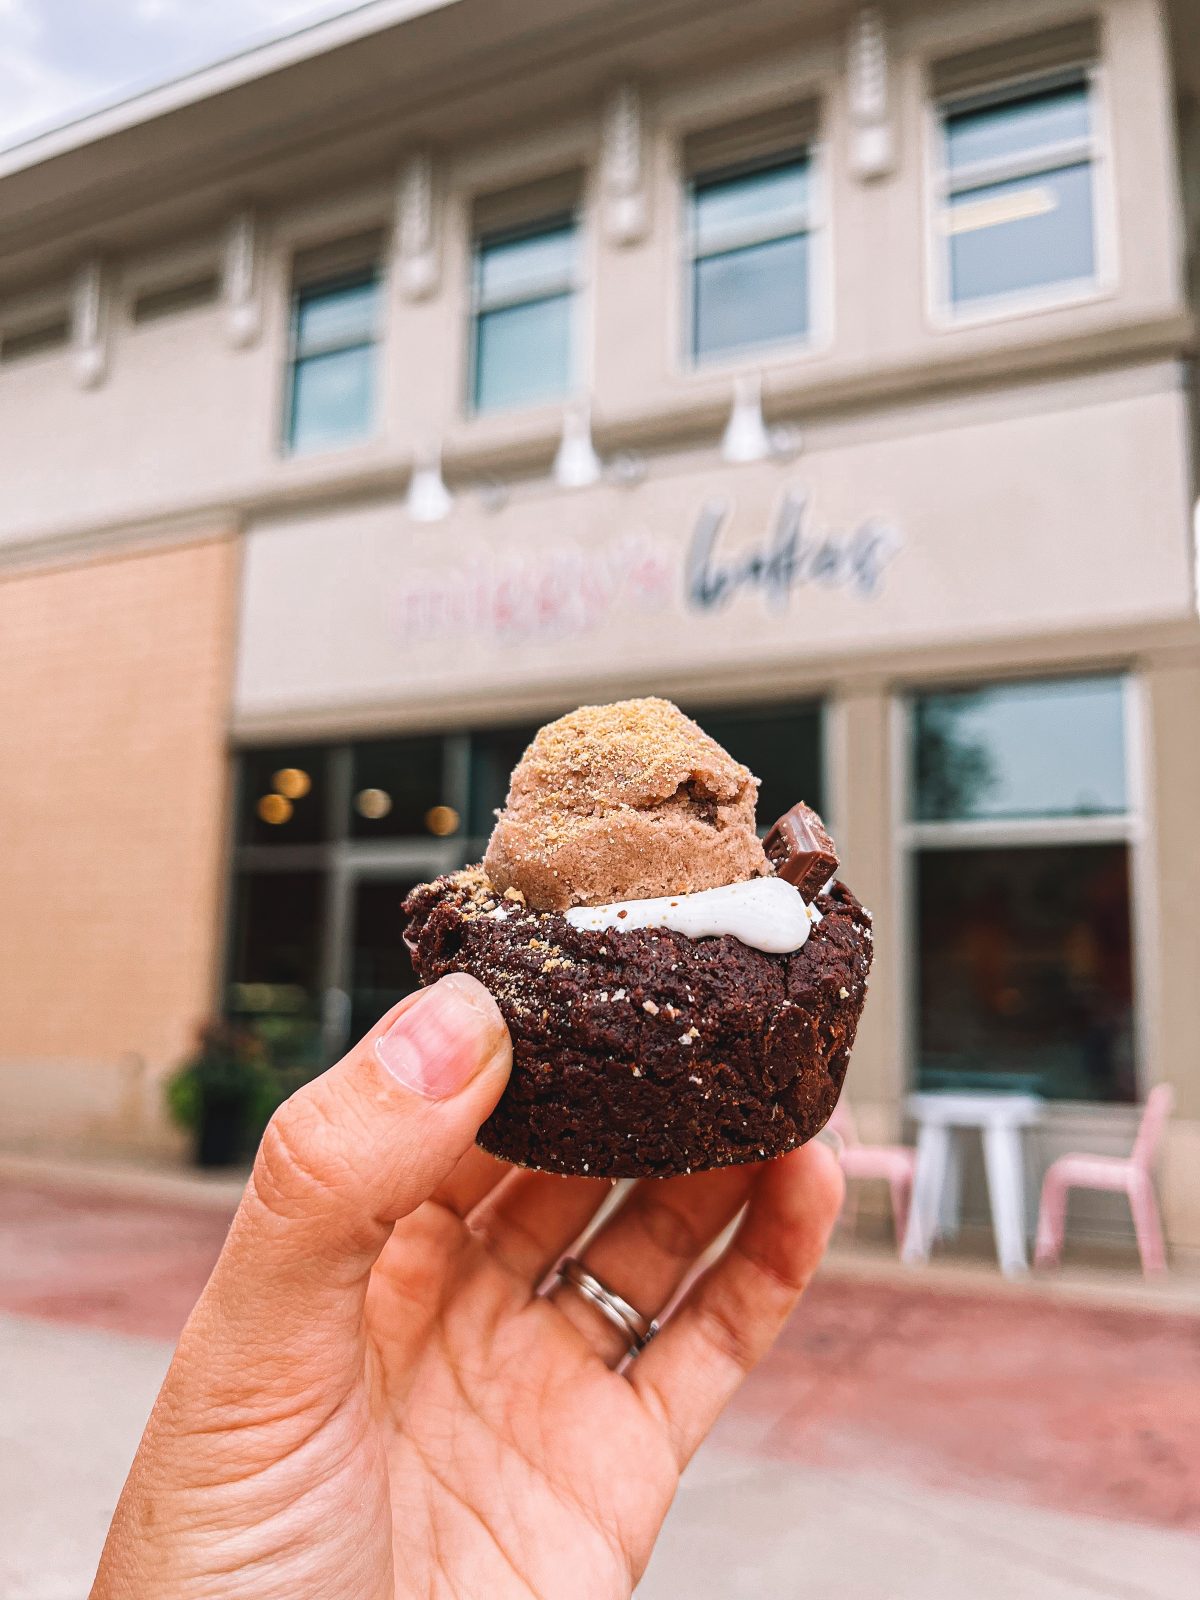 A person holding up a chocolate ice cream cupcake in front of a building.